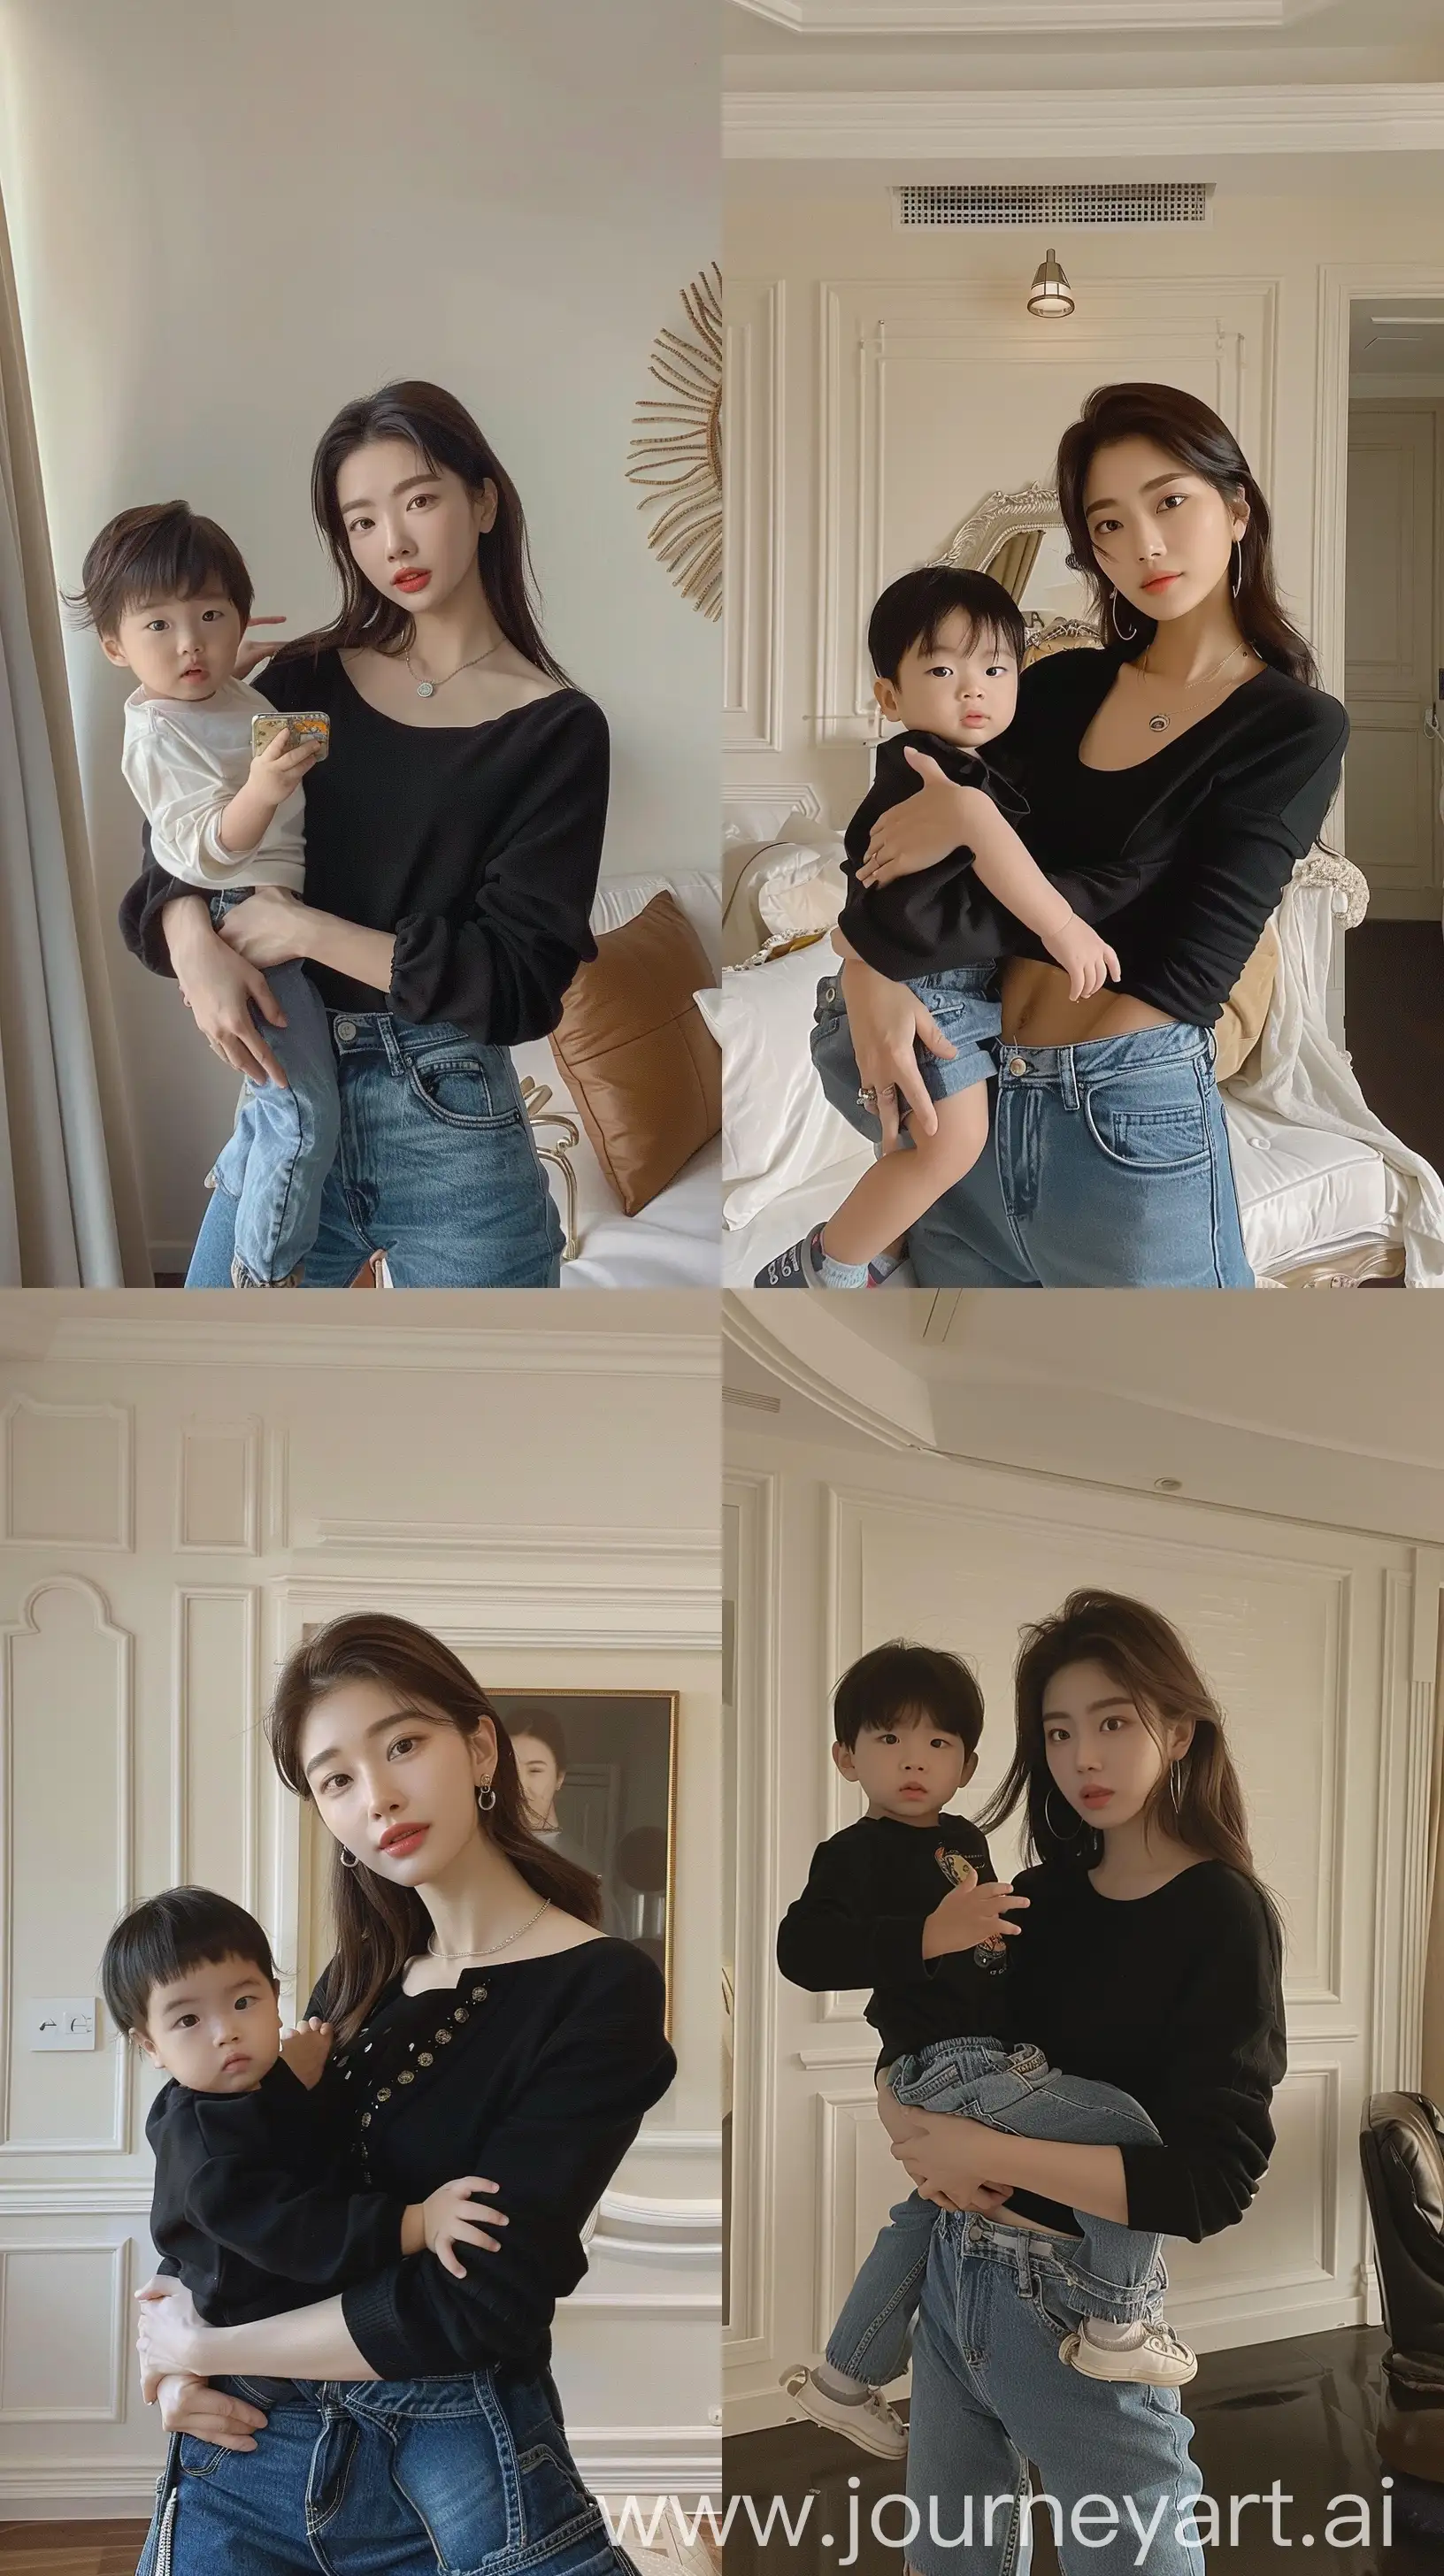 a jennie kim holding 2 years old kid, wearing black tops, baggie jeans pants, facial feature look a like jennie kim, aestethic selfie, inside cream room --ar 9:16